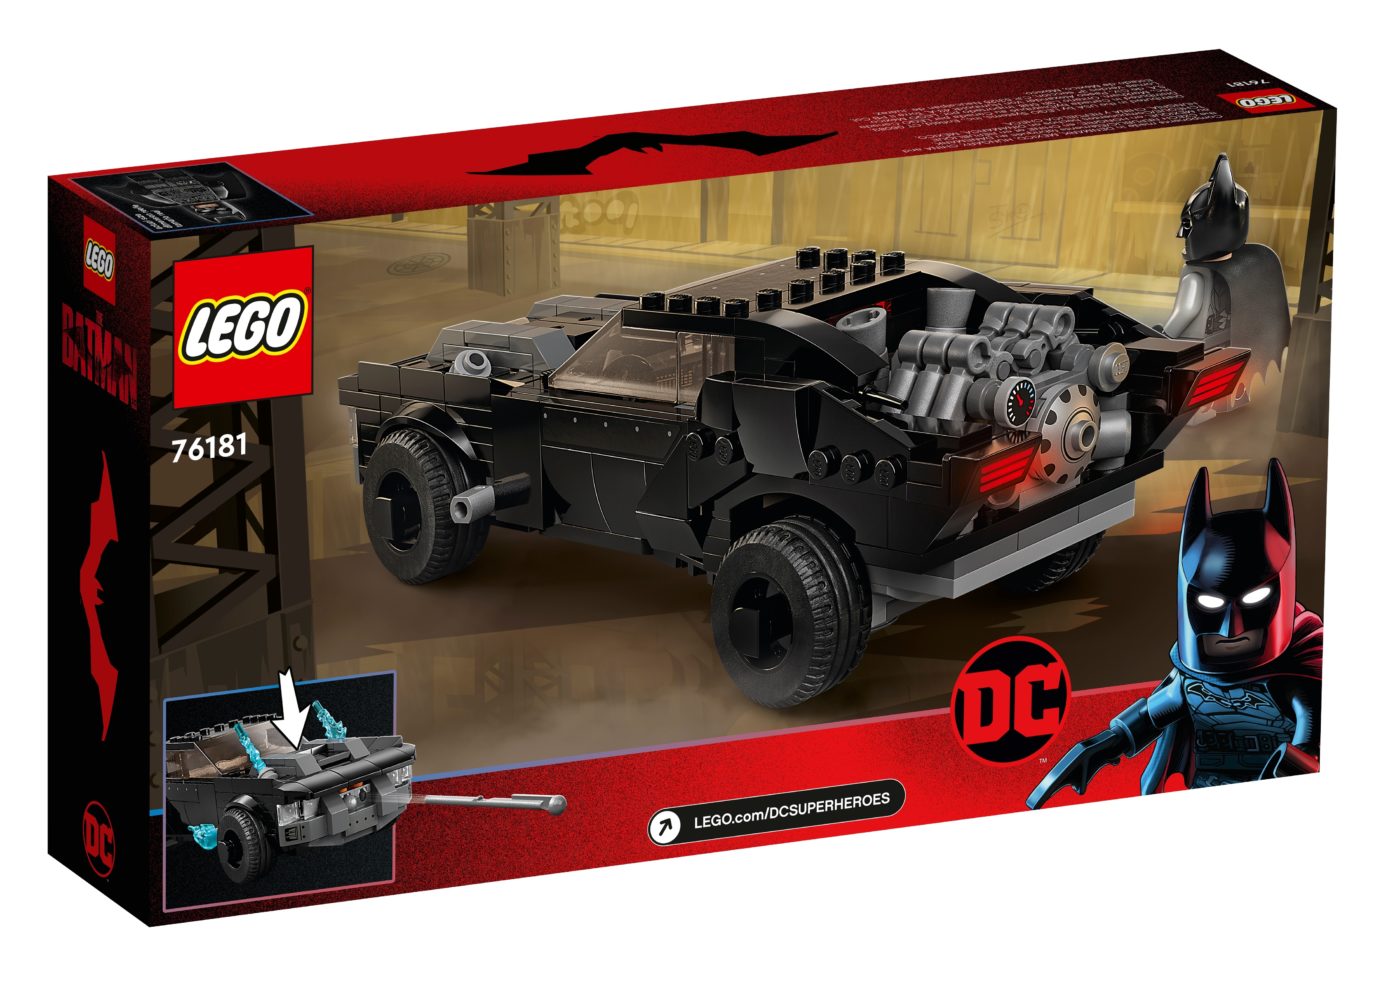 First look: The Batman (2022) LEGO and Technic sets revealed